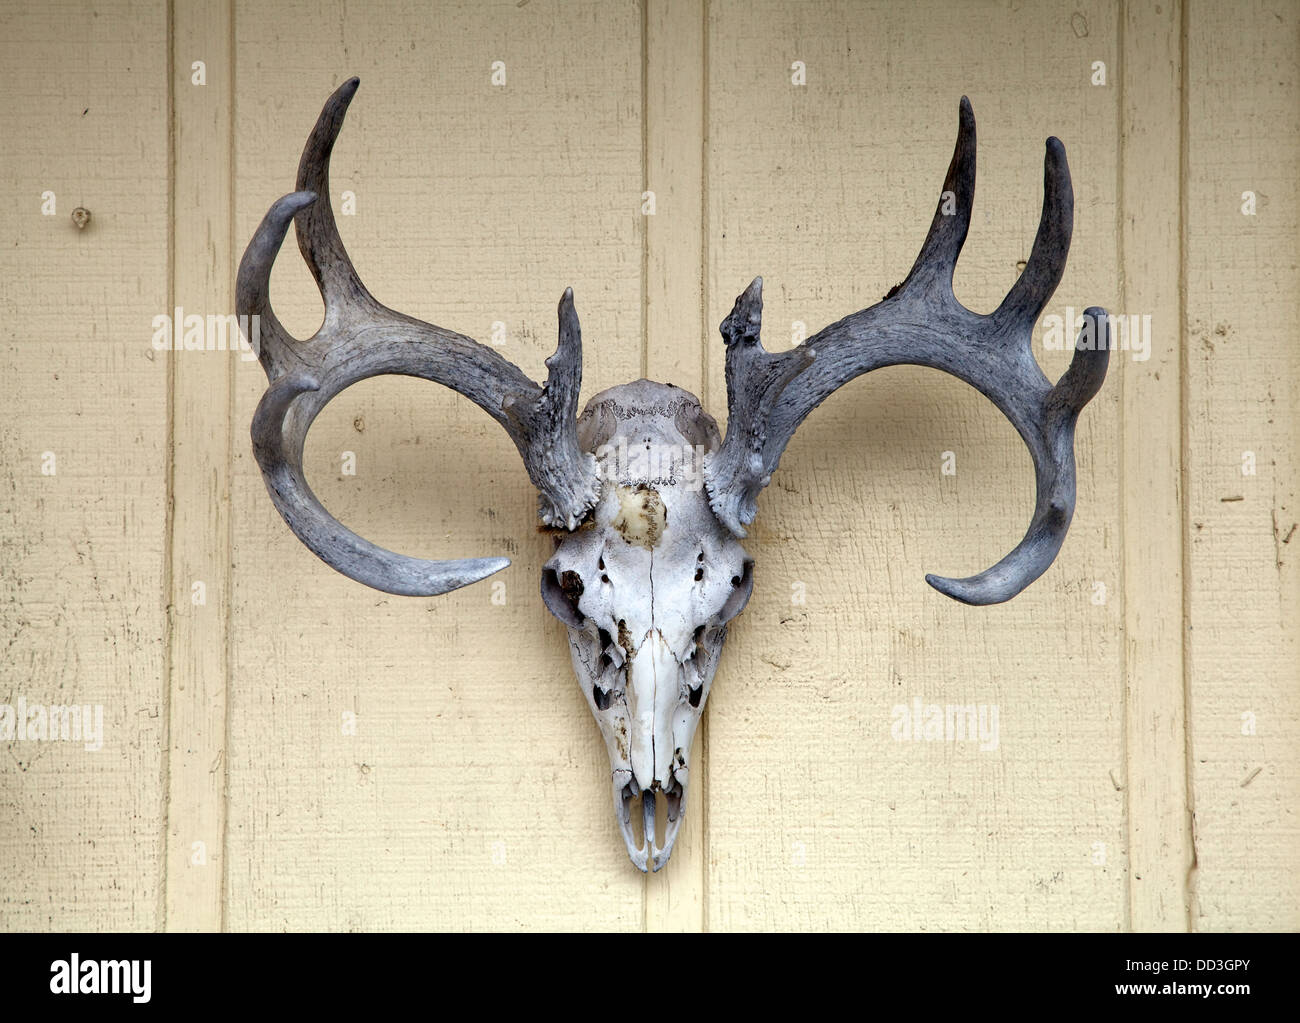 White-tailed deer skull and antlers Stock Photo